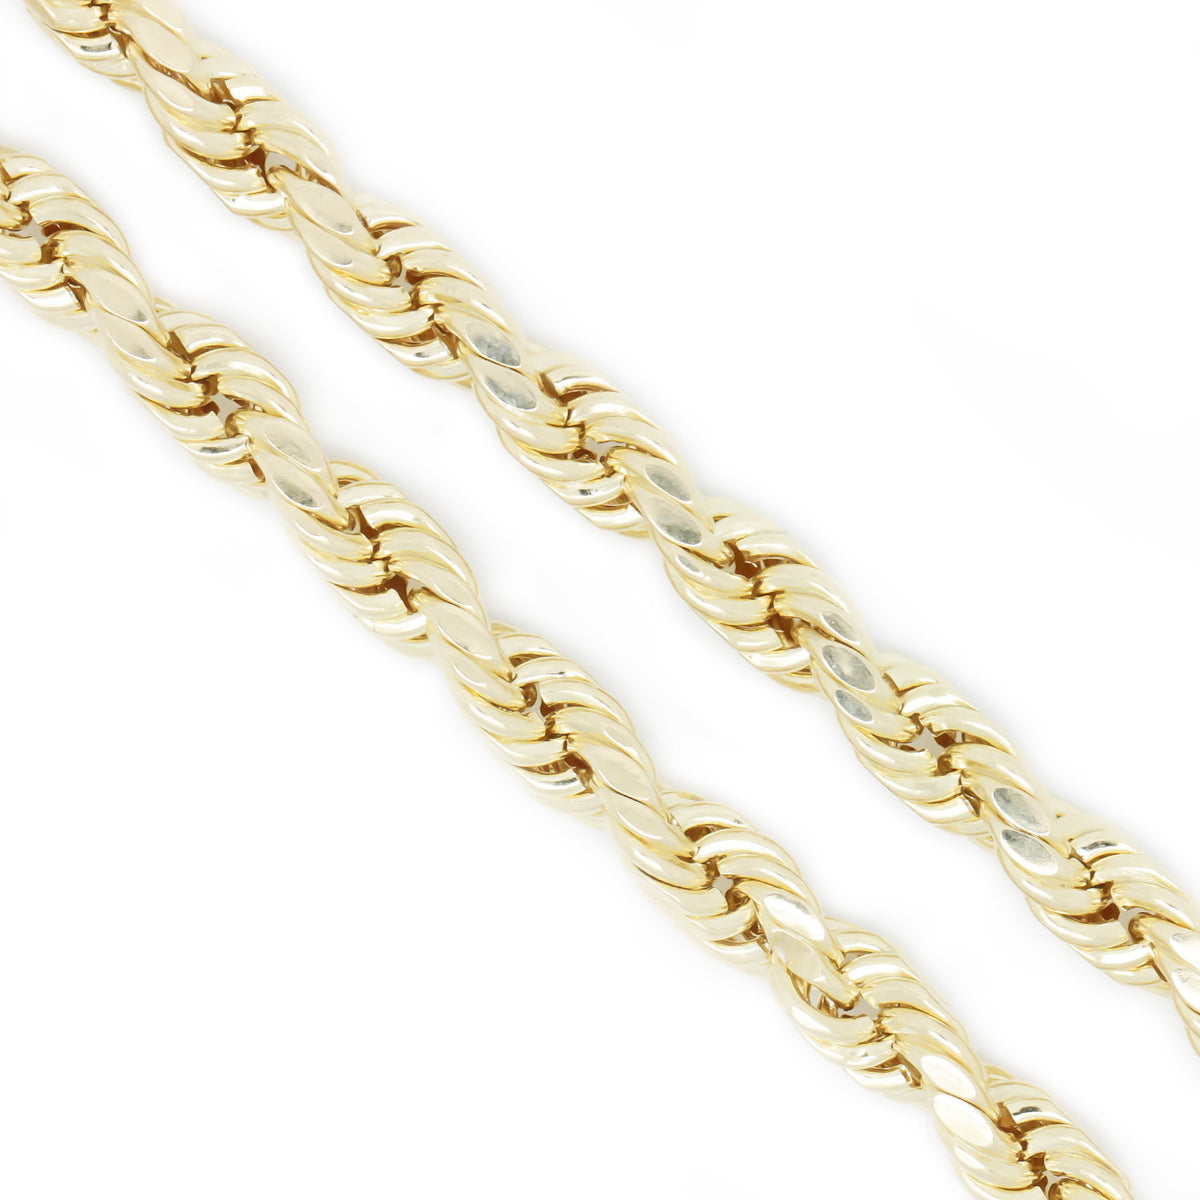 10K Yellow Gold 3.0 mm Rope Chain Necklace 22 Inches